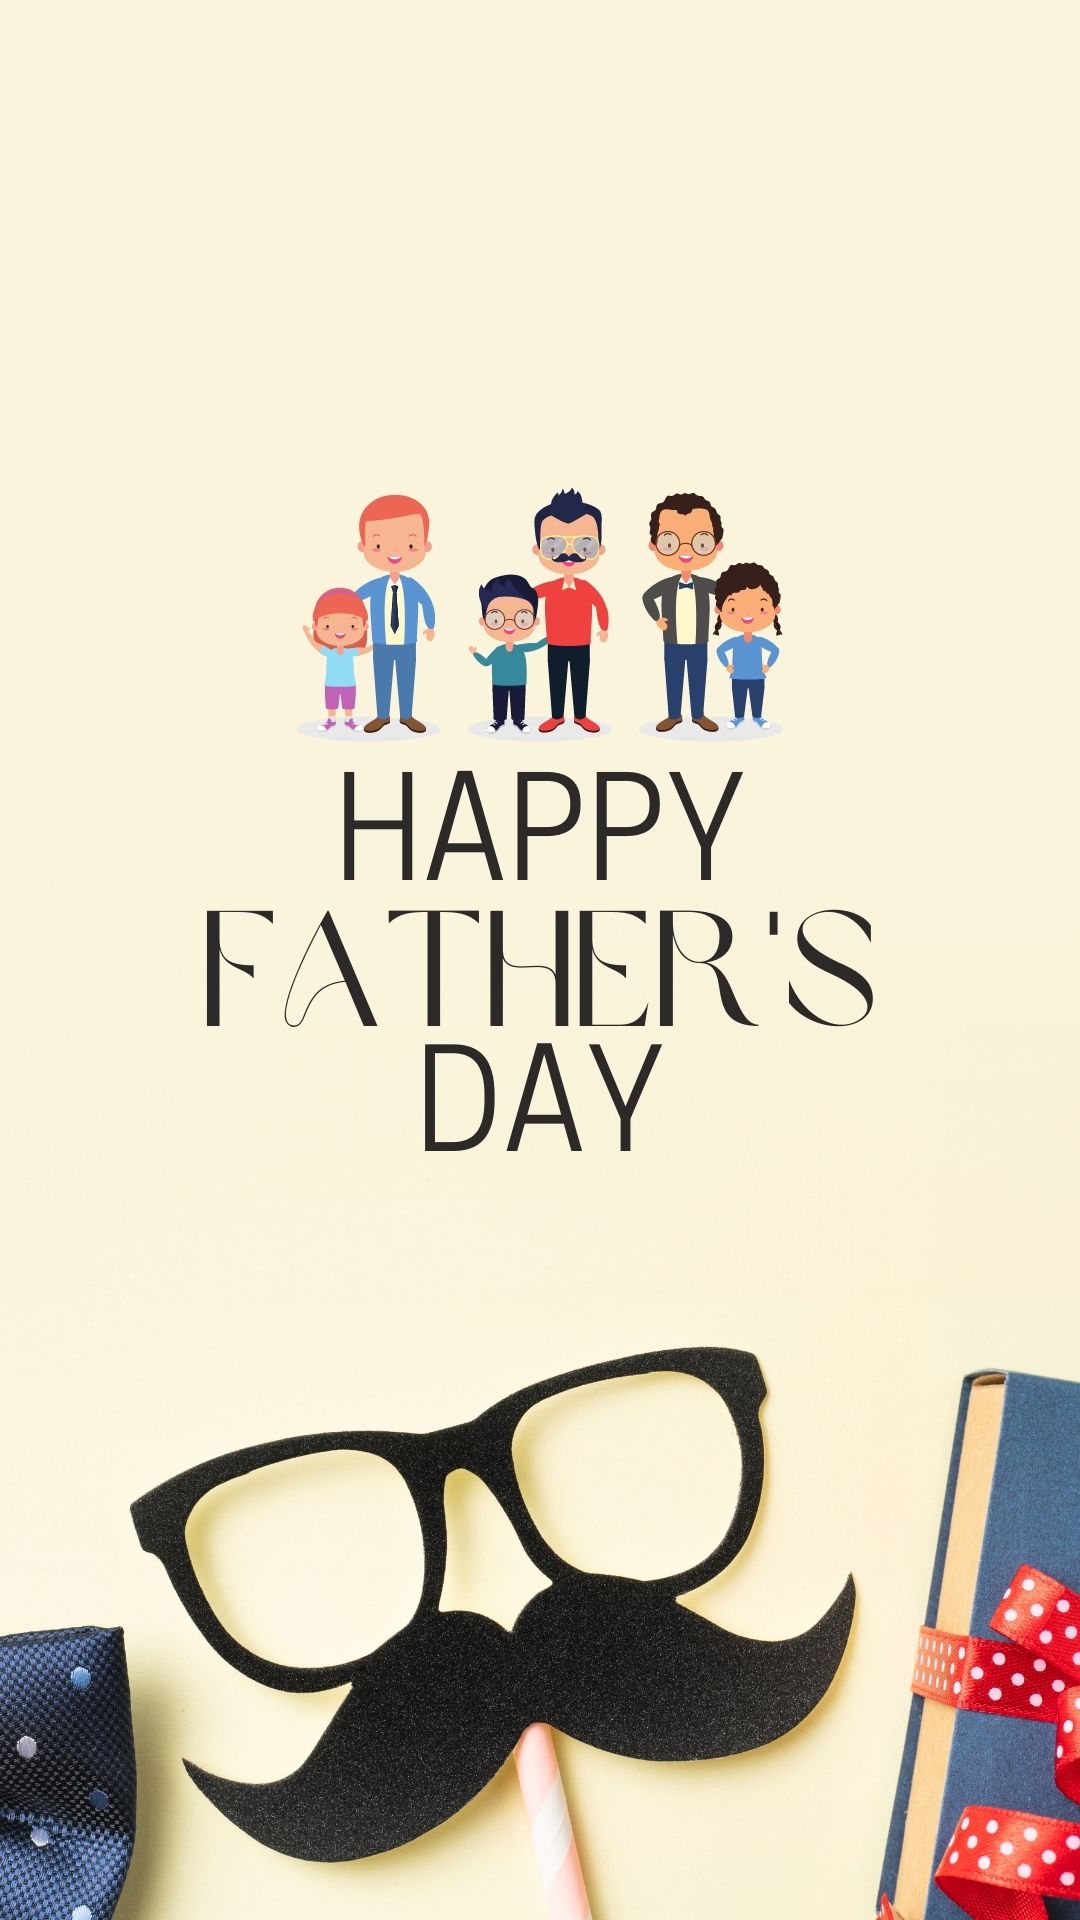 best happy father's day wishes images for instagram story (14)